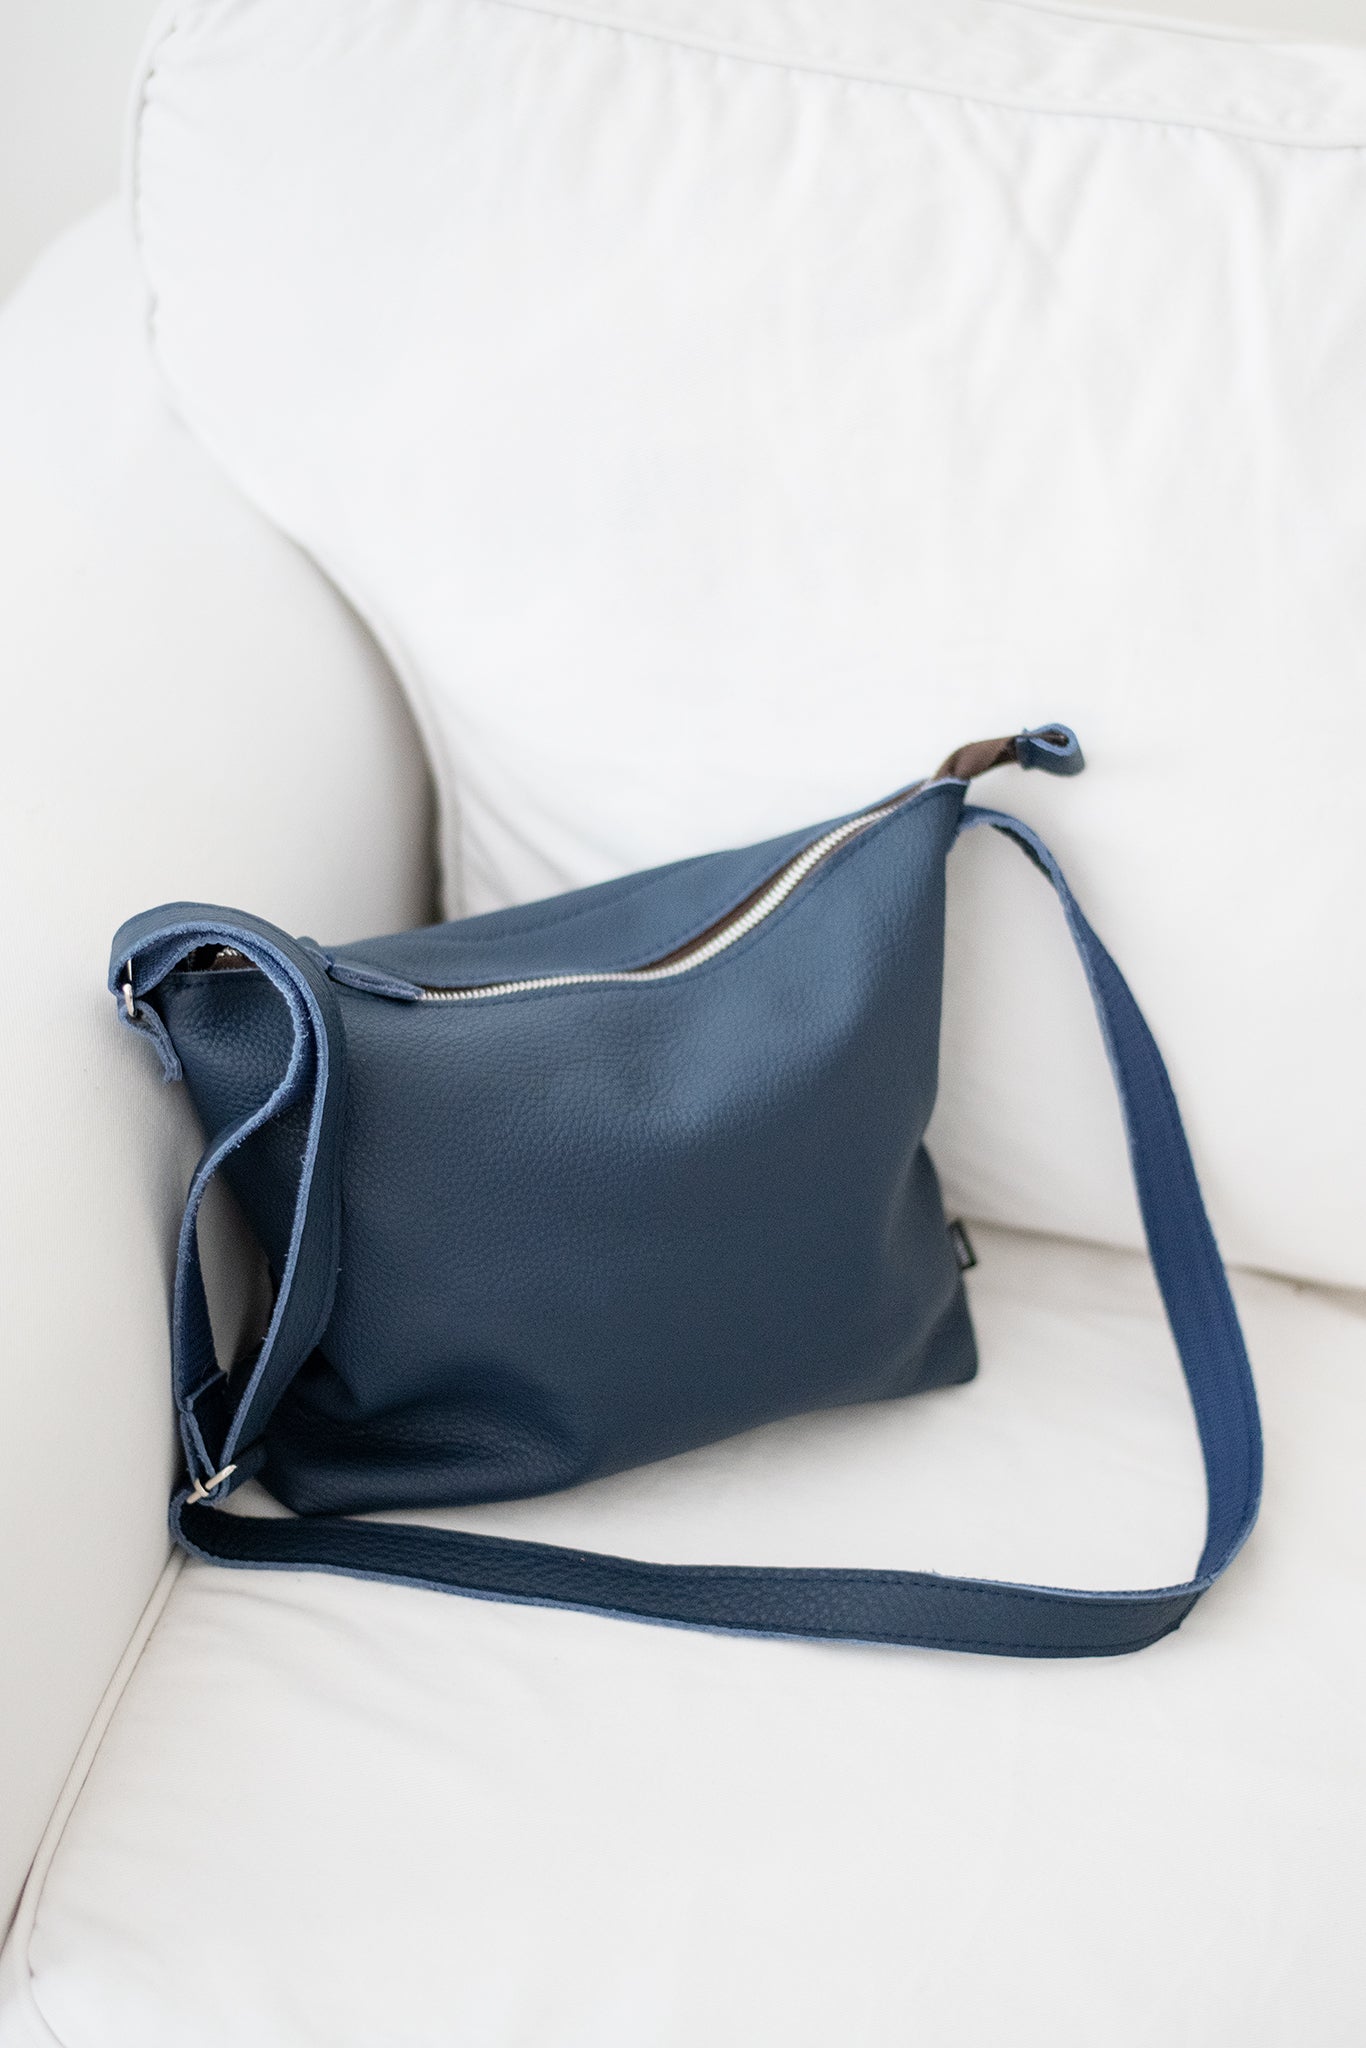 Handmade Anet L shoulder bag from furniture industry leftovers, dark blue, unique design, eco-friendly, durable, made in Estonia.